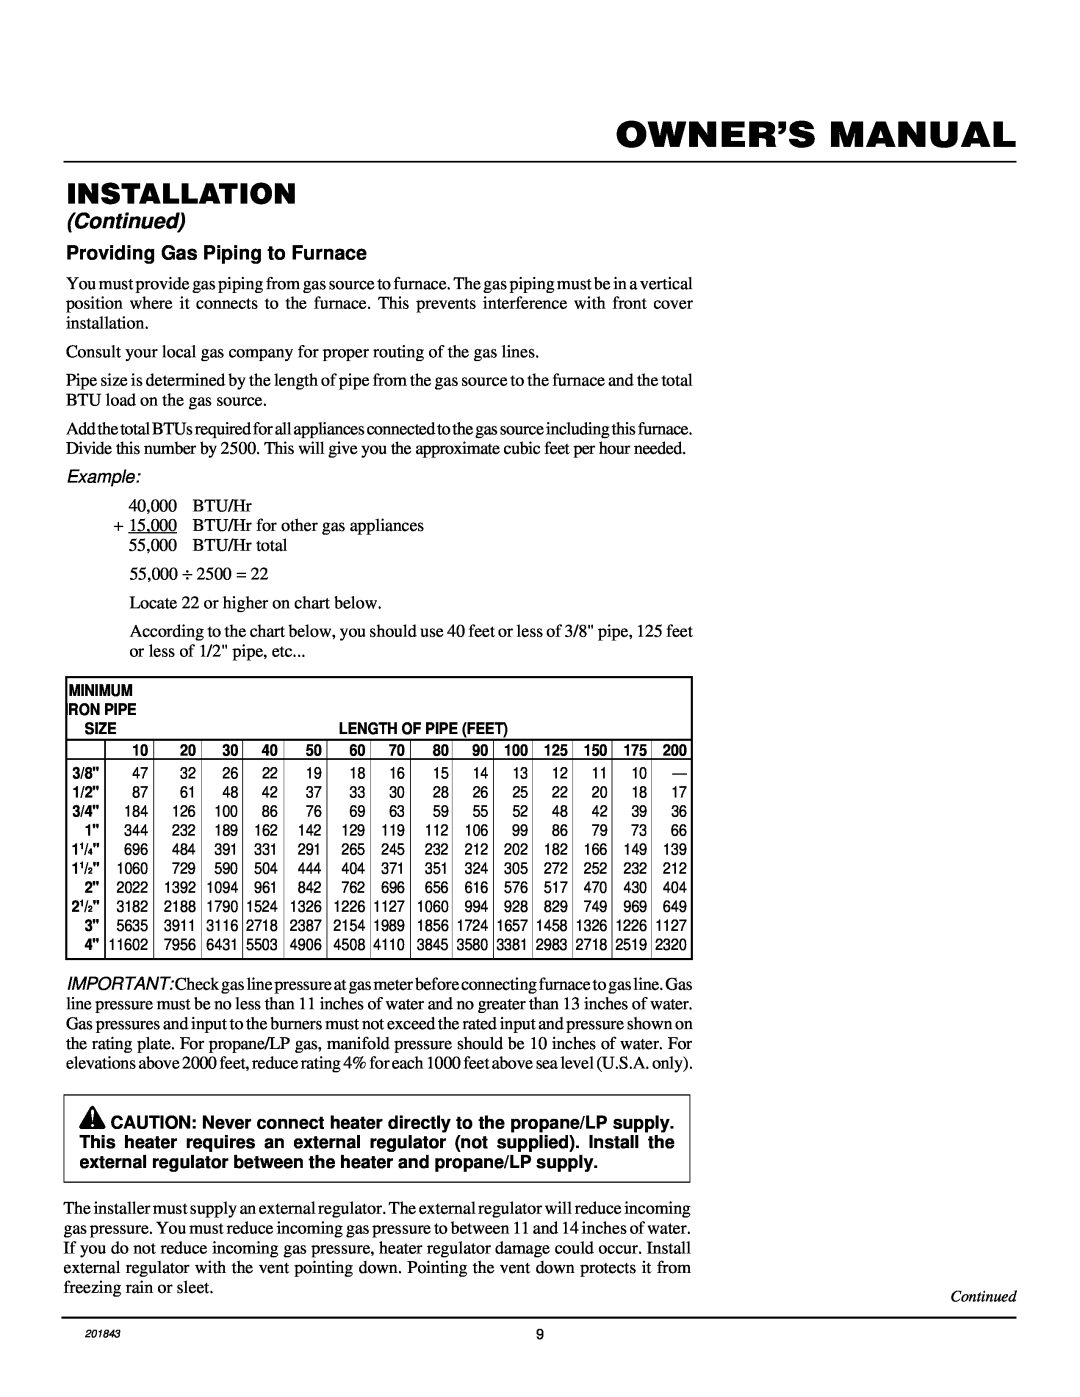 Williams 4003531, 2503531 installation manual Installation, Continued, Providing Gas Piping to Furnace 